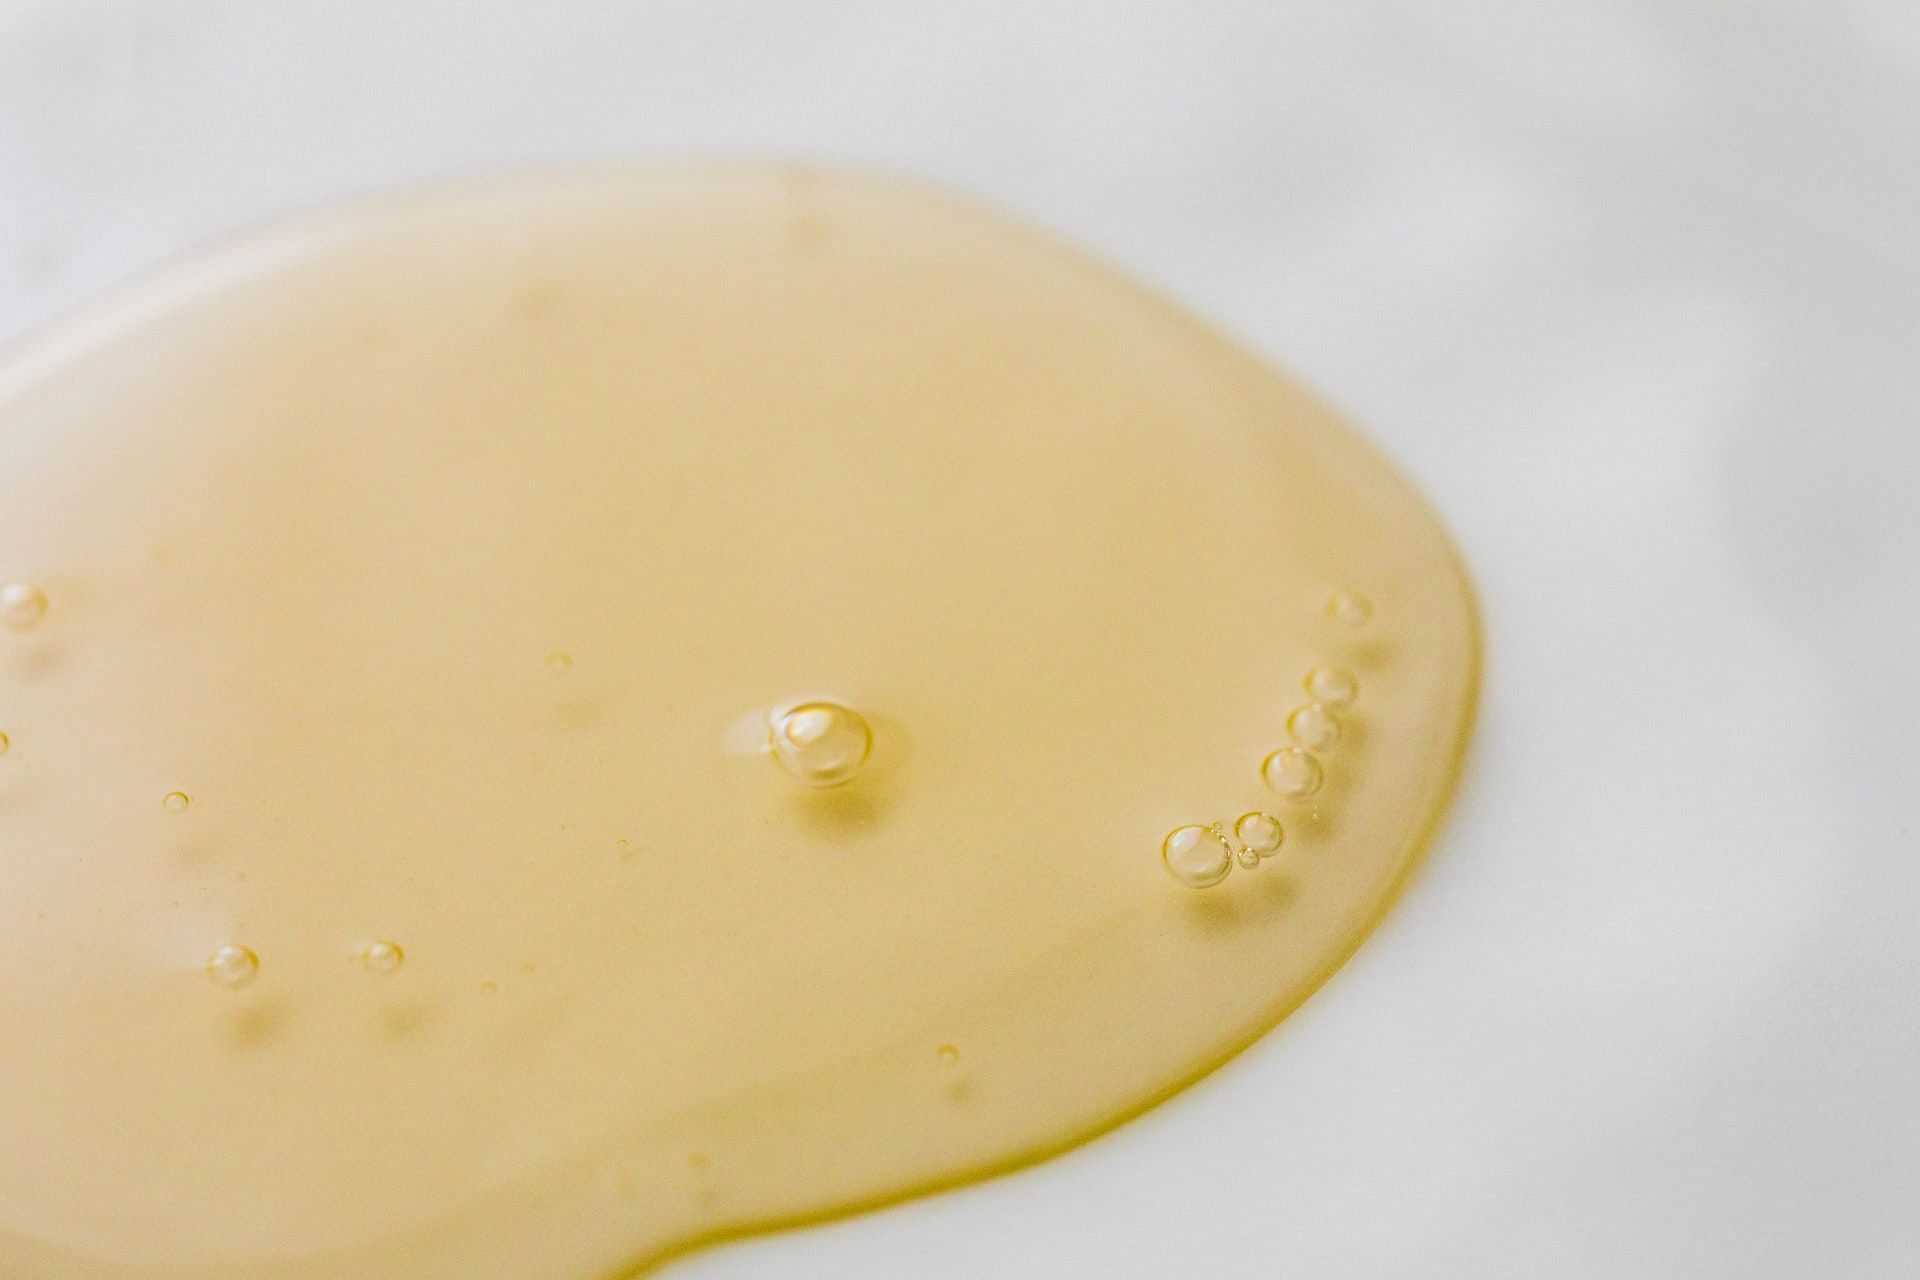 Emu oil is a yellow liquid that is made from the fat of emus. (Photo via Pexels/Karolina Grabowska)